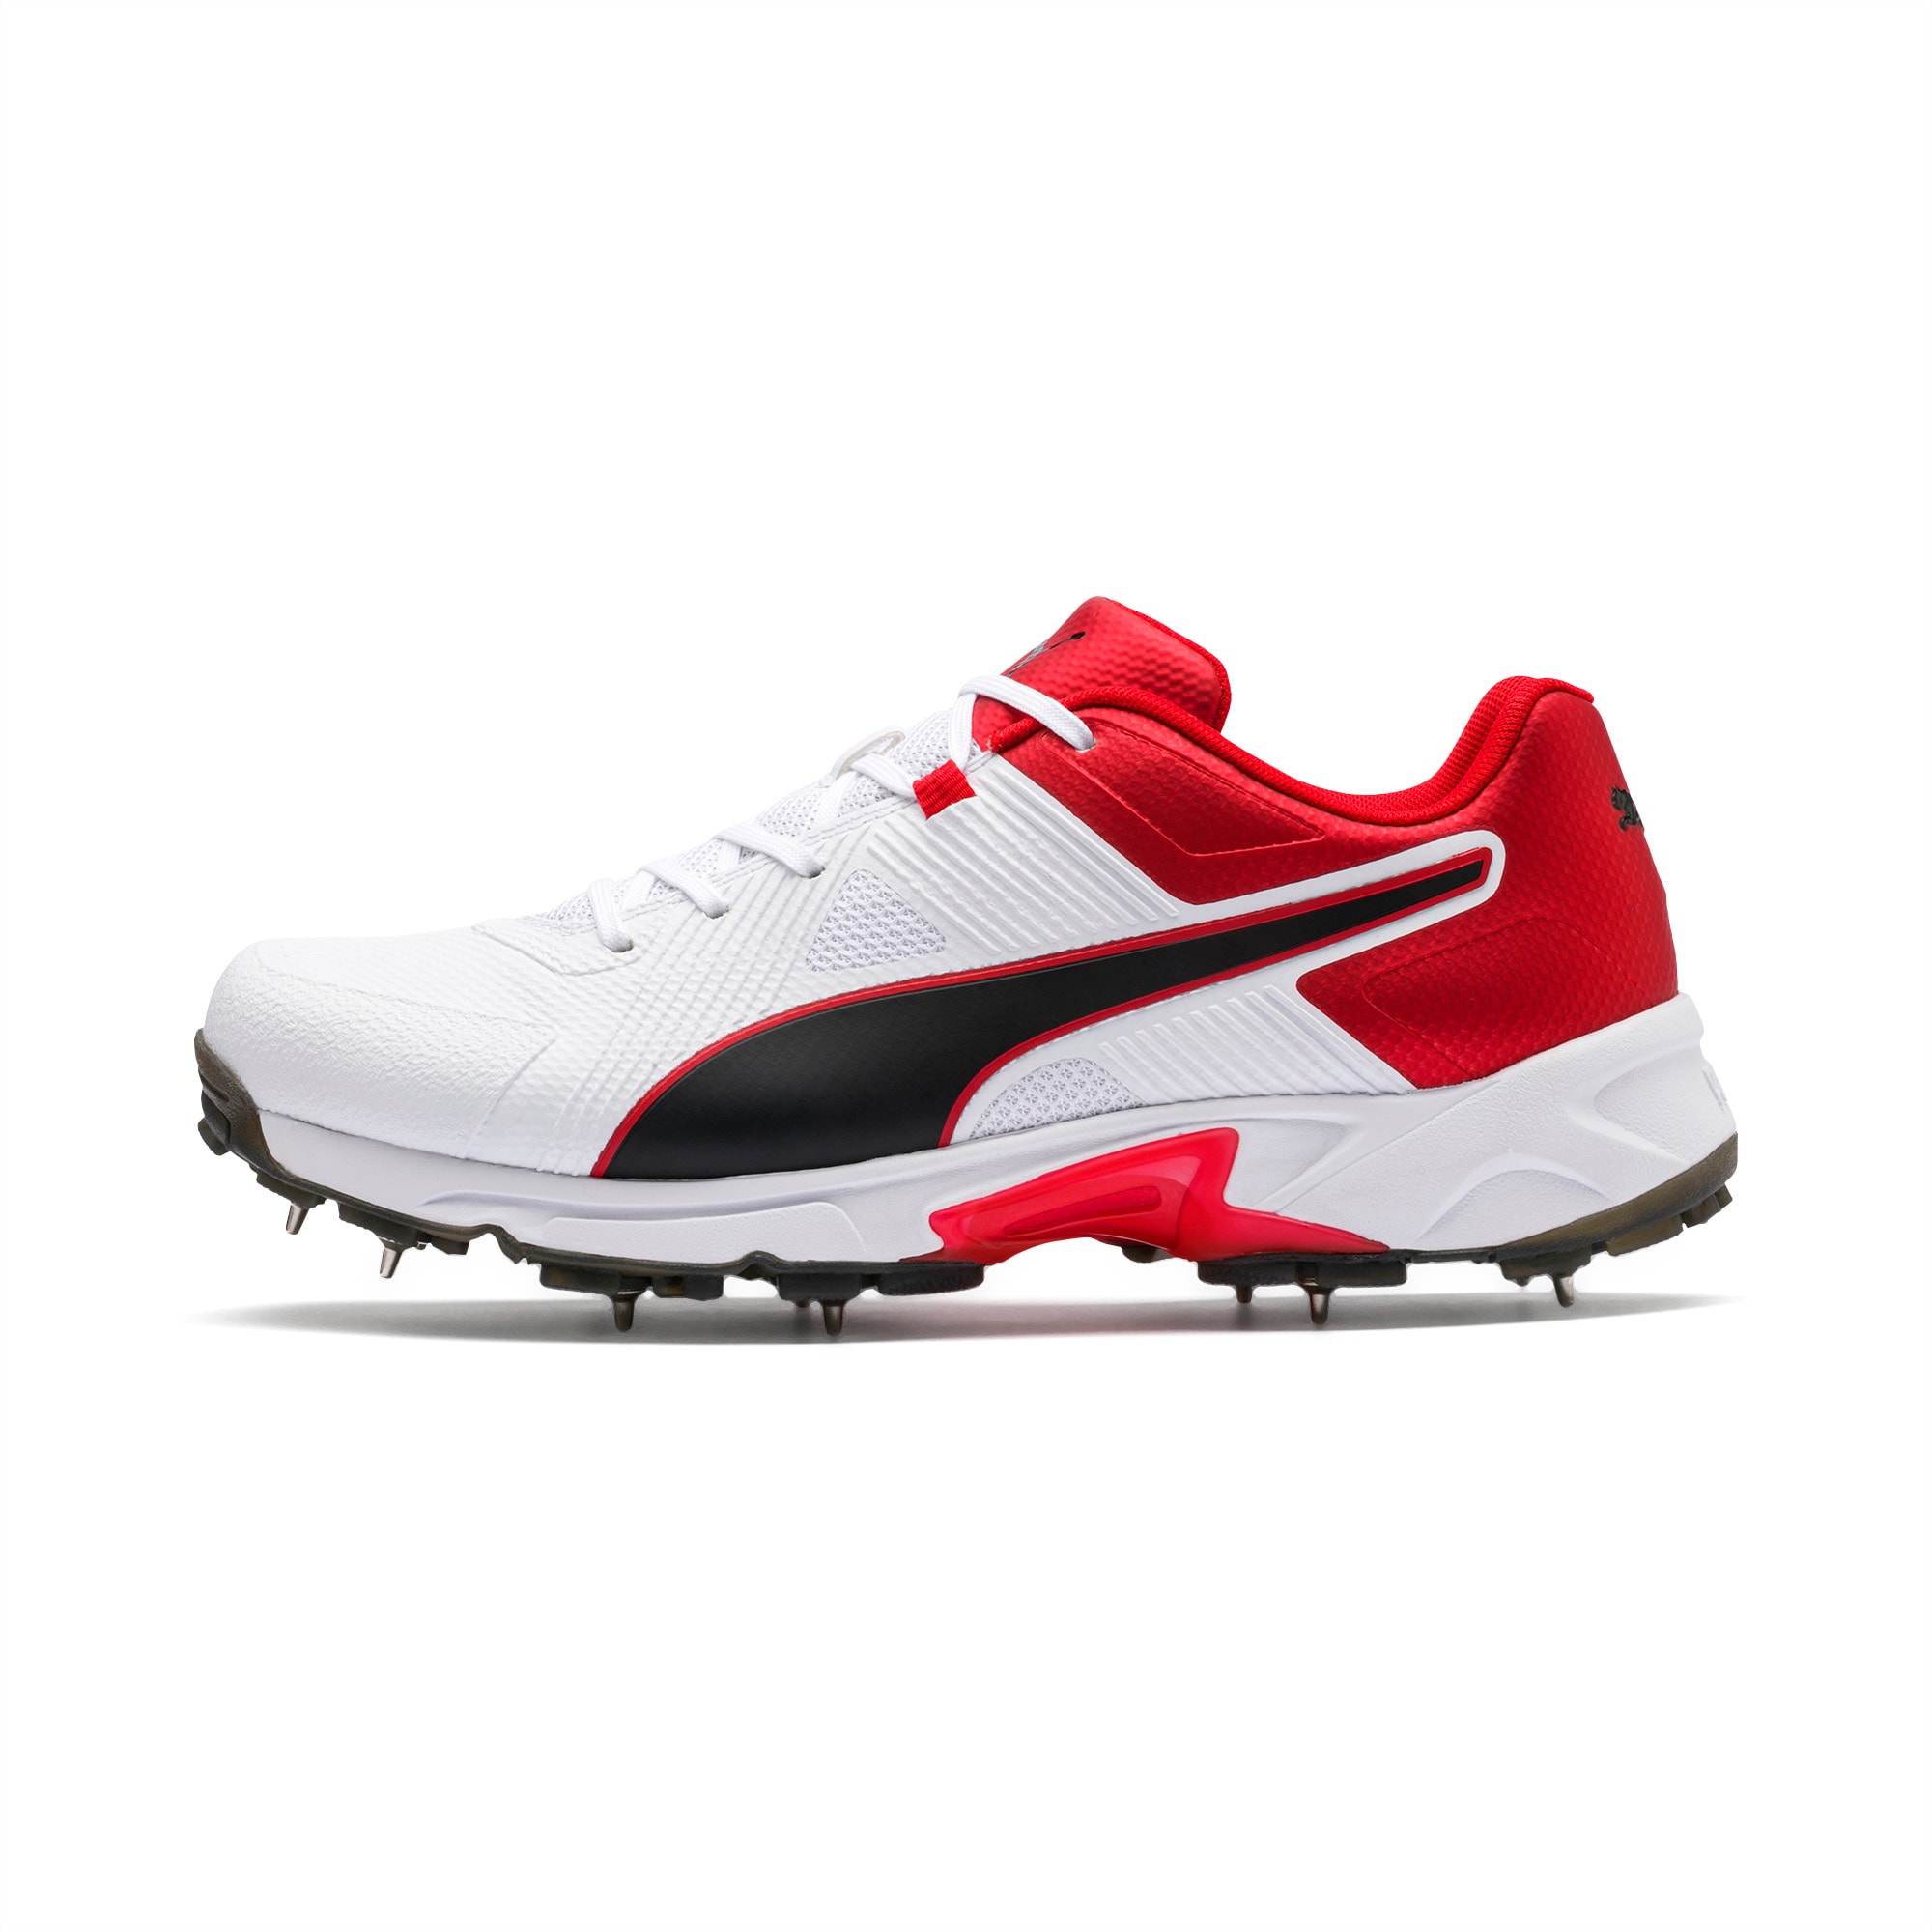 puma spikes shoes for cricket